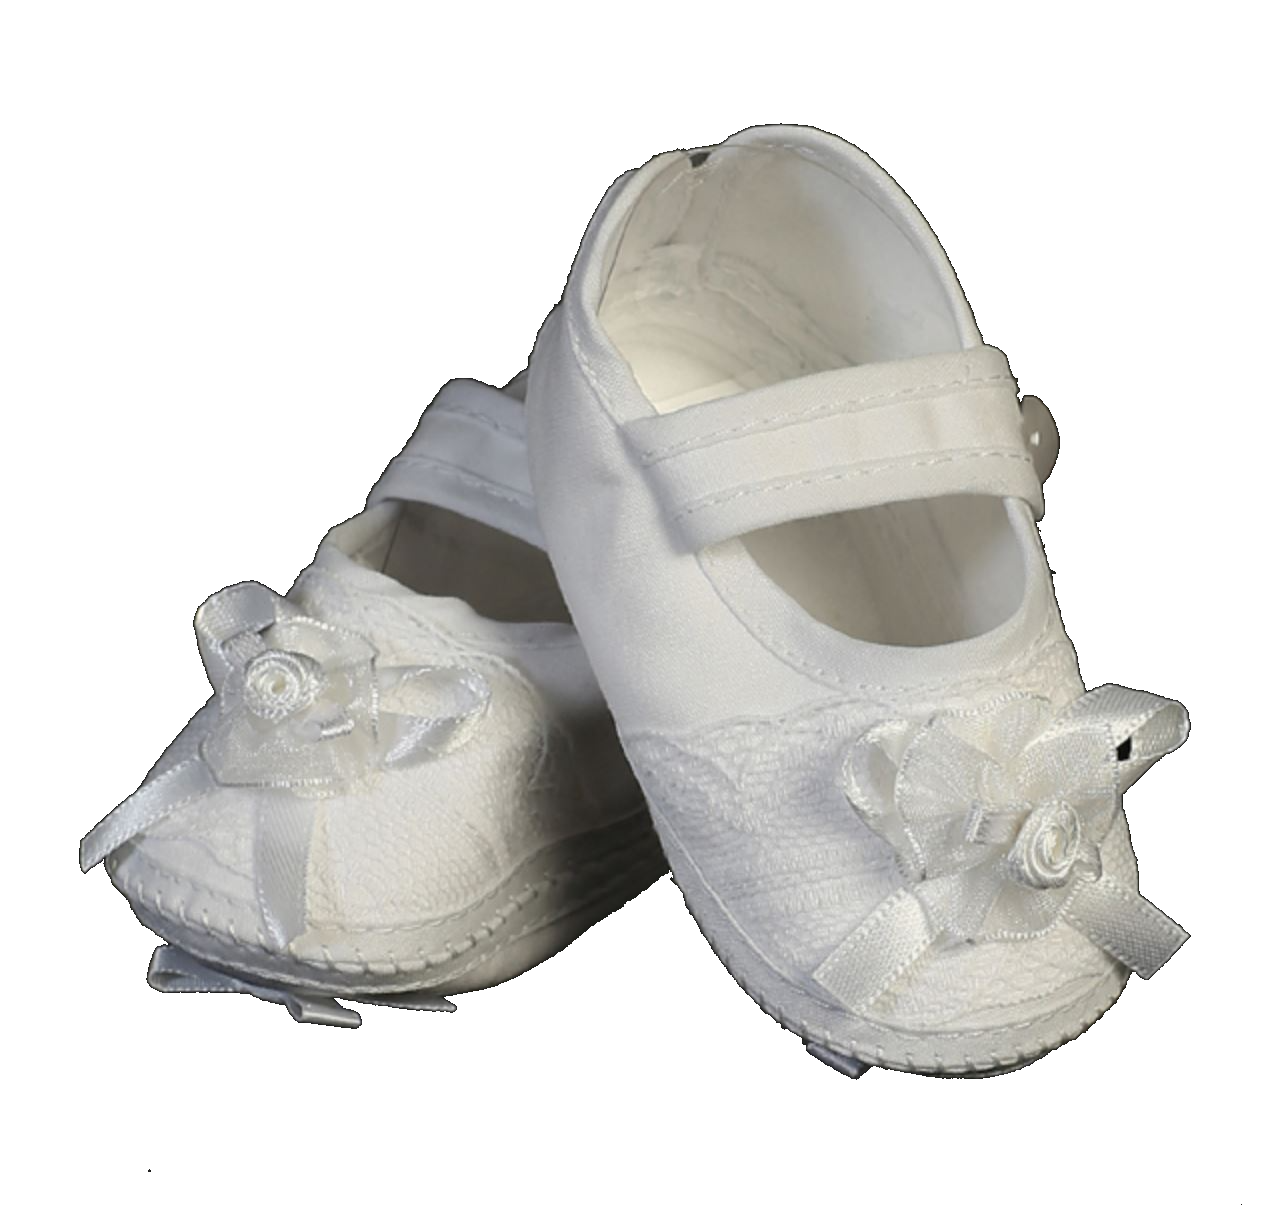 Complete Her Look: Girls' Baptism Bootie - Perfect Accessory